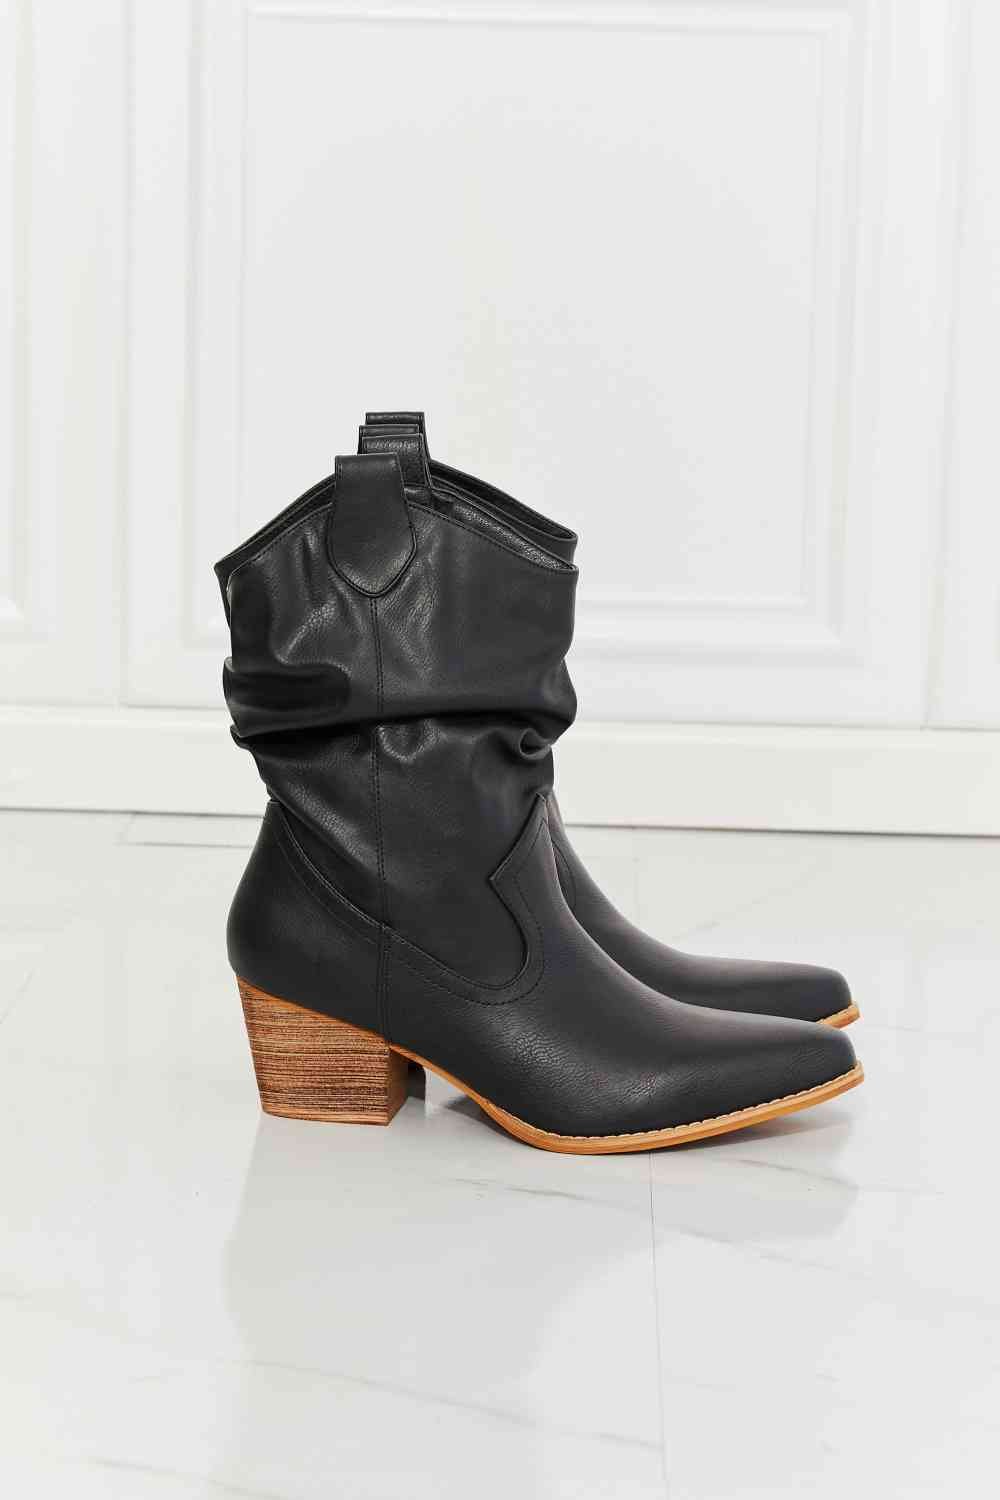 MMShoes Better in Texas Scrunch Cowboy Boots in Black - Fashion Girl Online Store